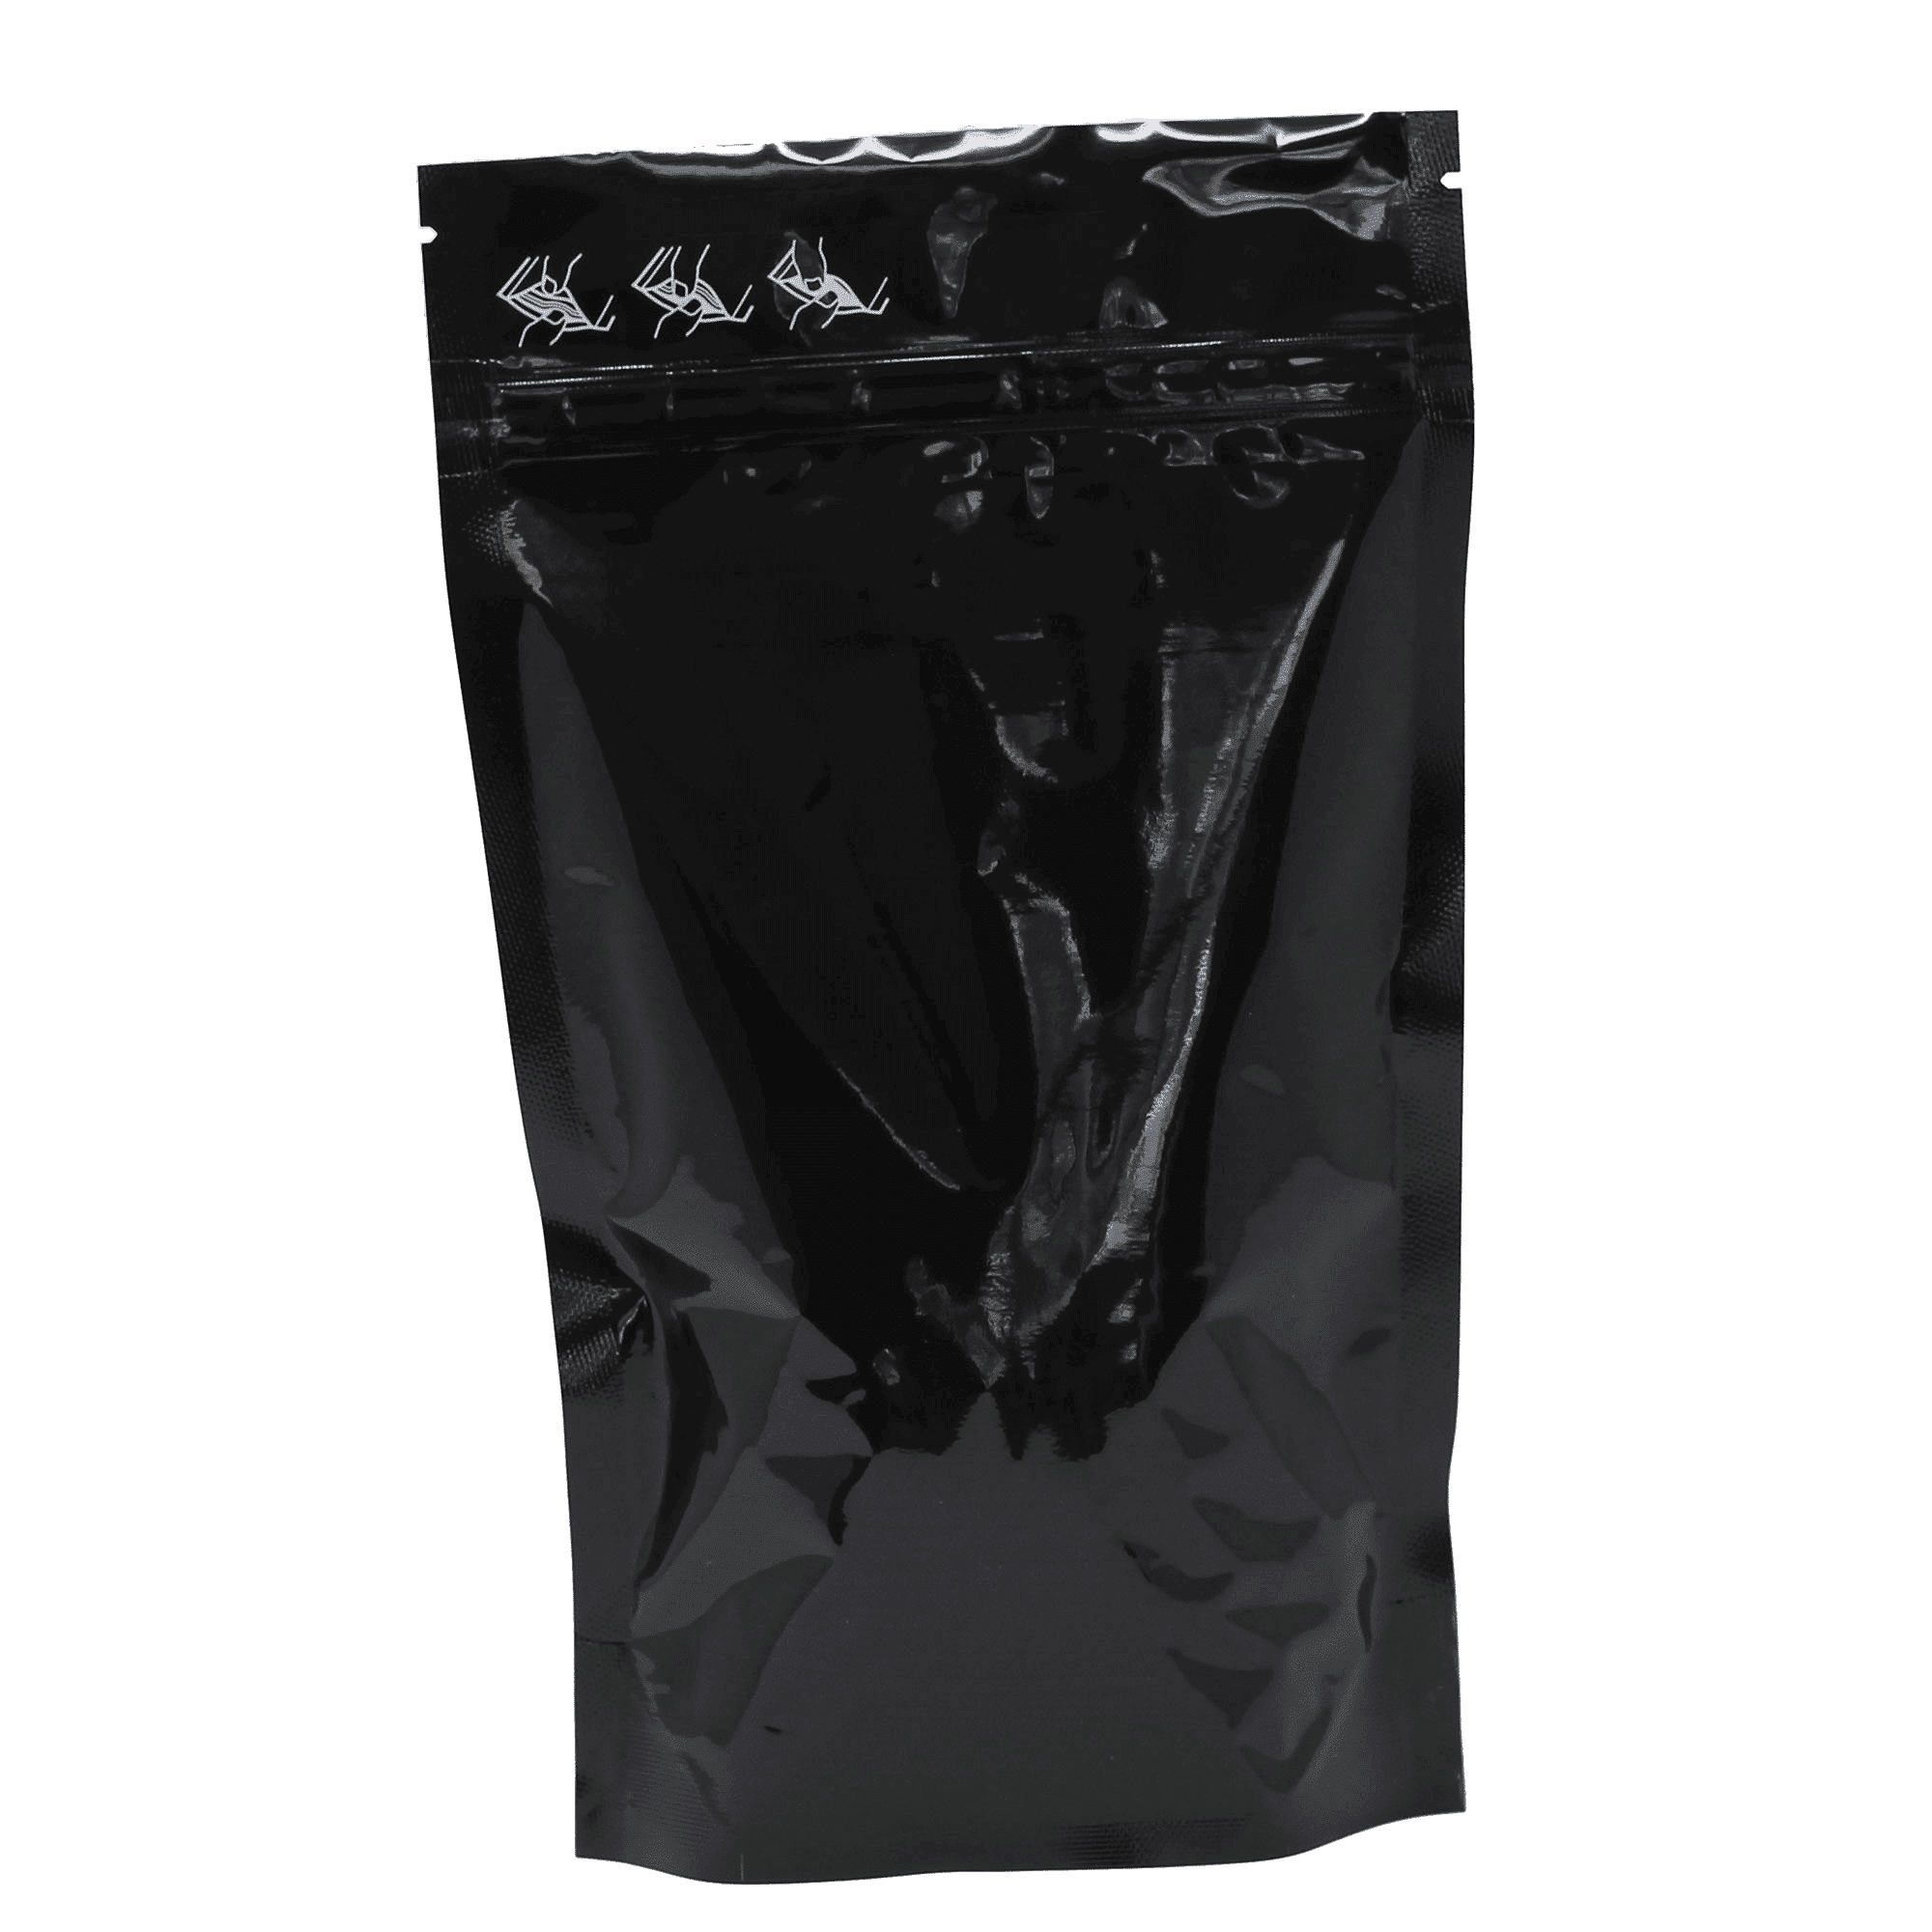 Download Custom Weed Bags - Custom Cannabis Packaging | Pouch Worth